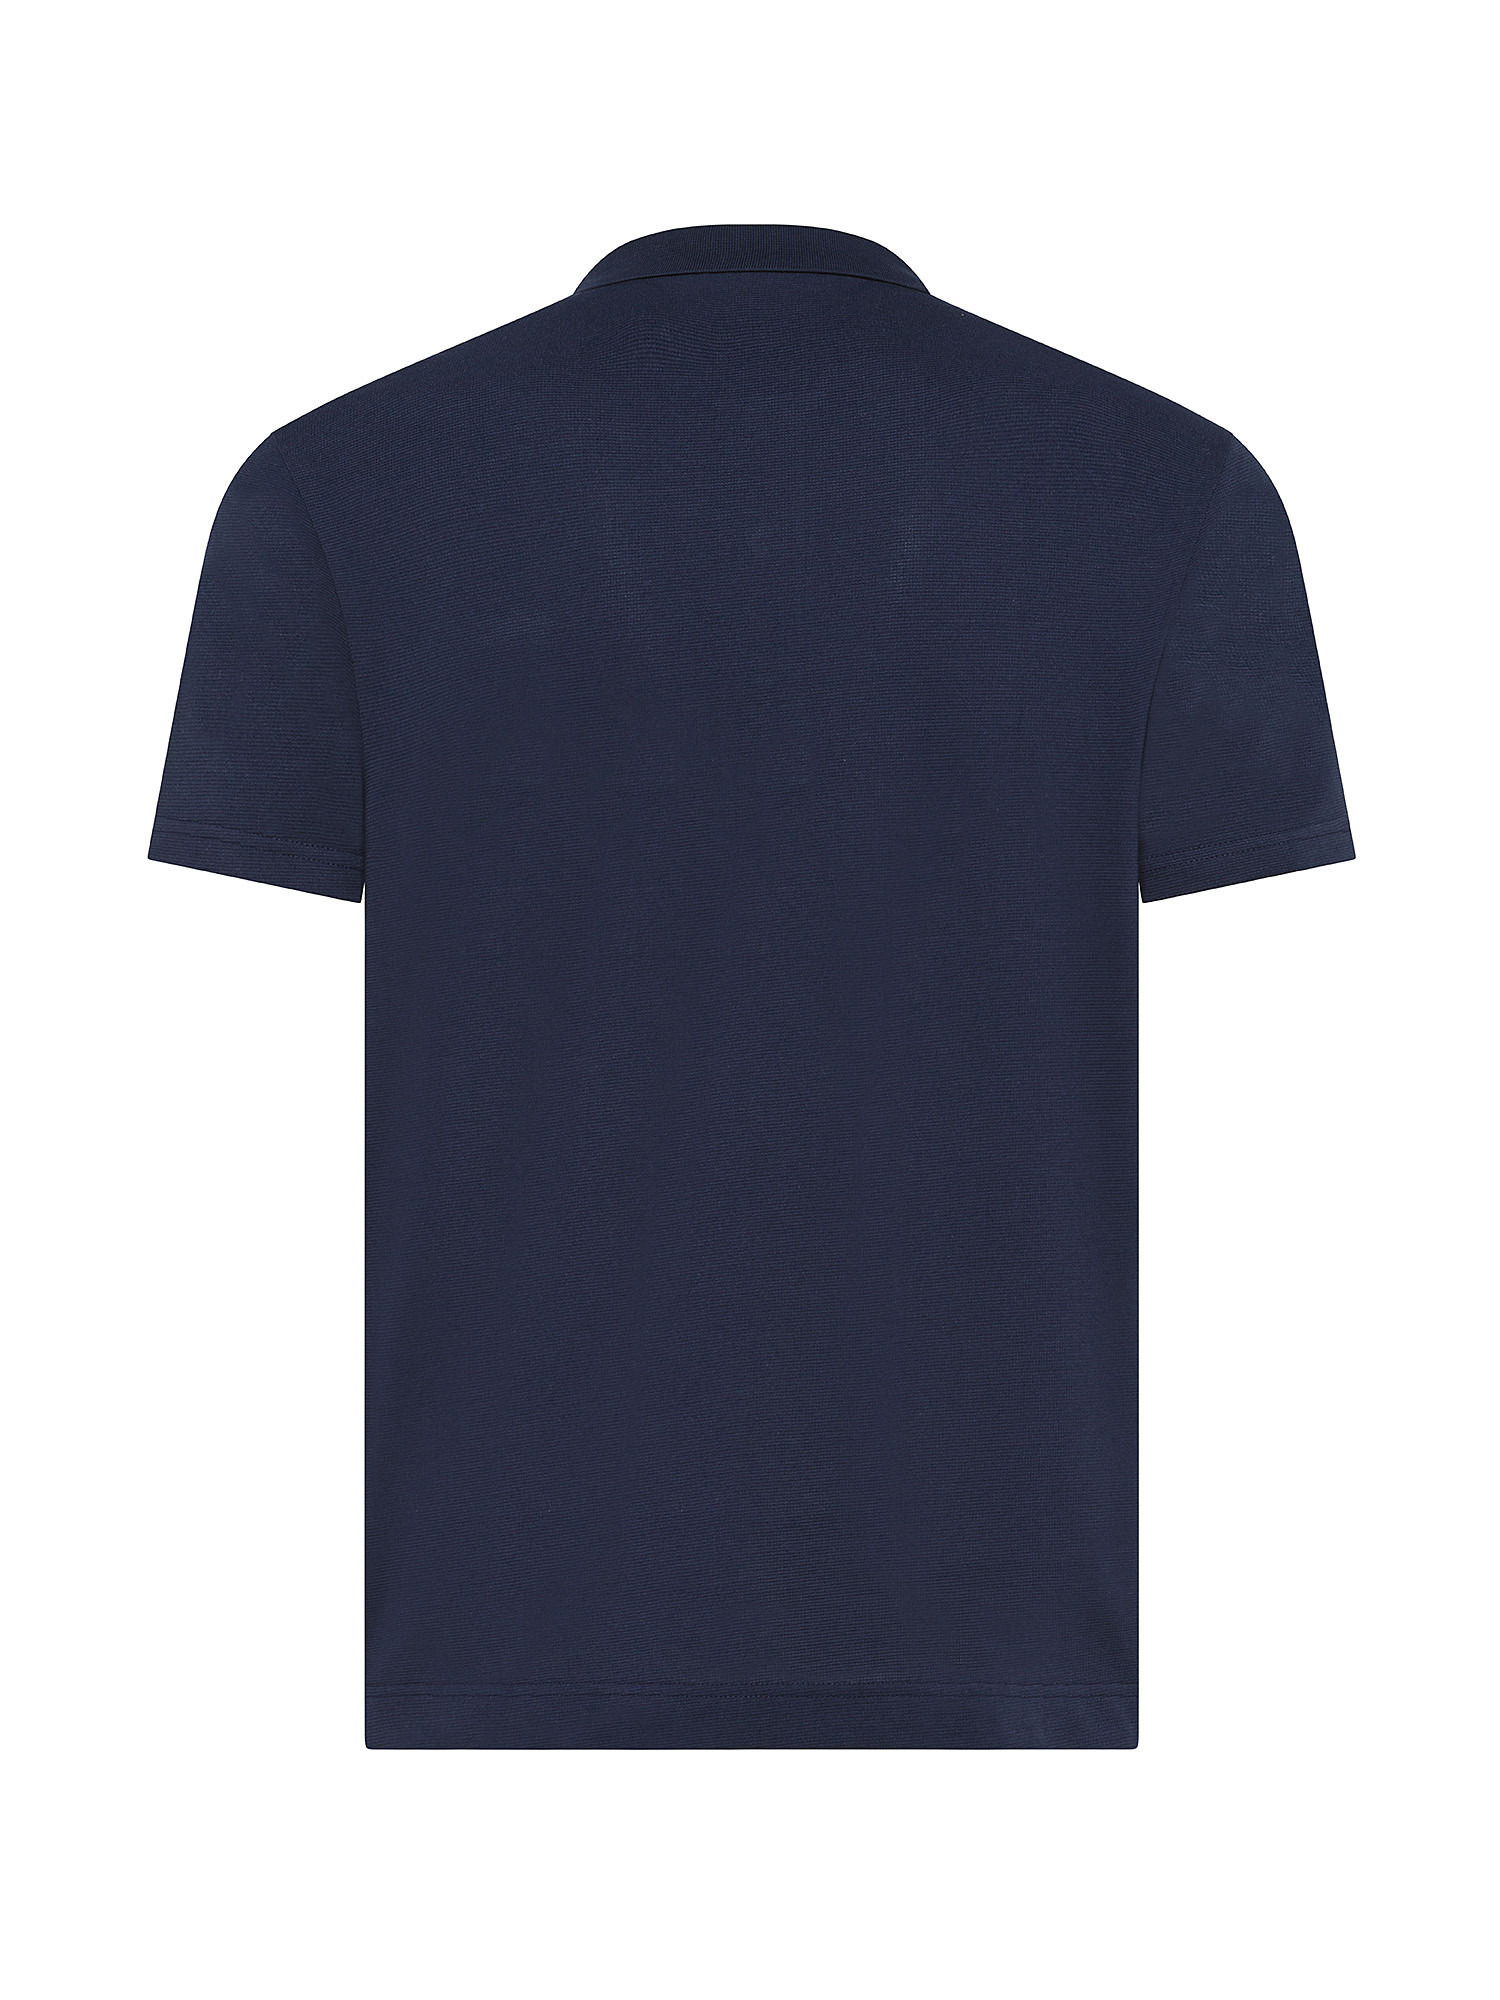 Lacoste - Regular fit stretch polo, Dark Blue, large image number 1